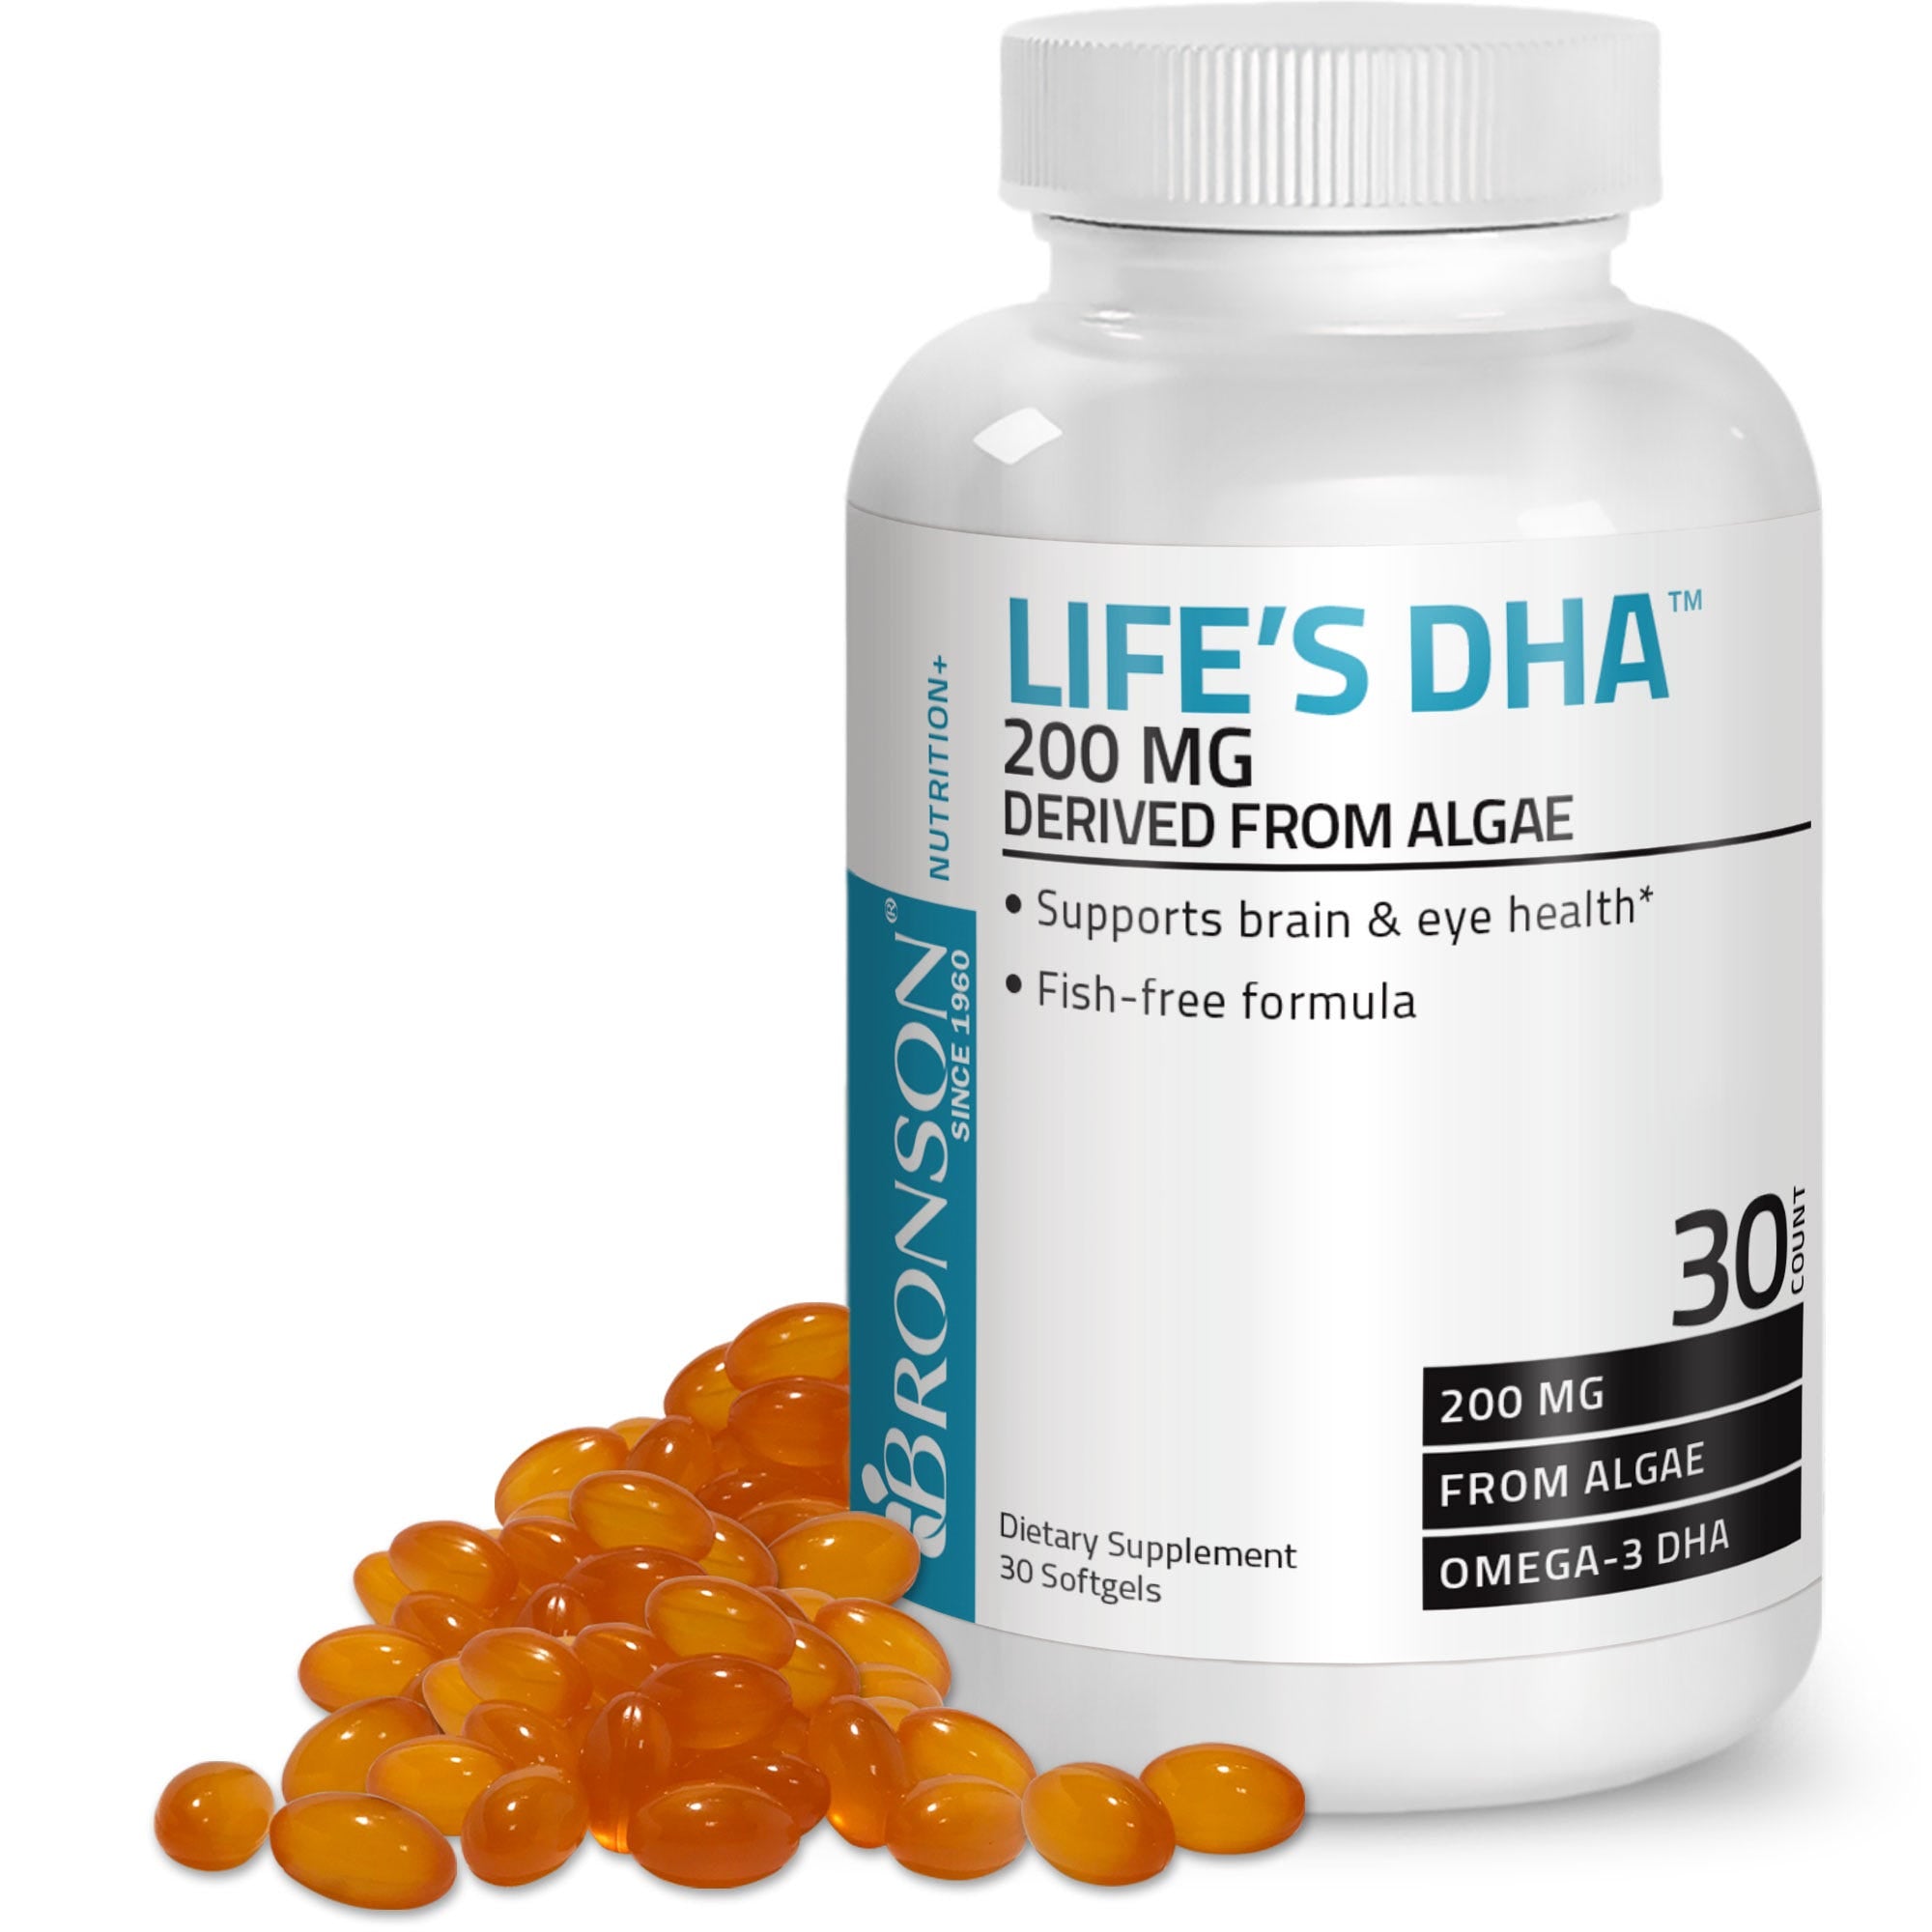 Life's DHA™ Vegetarian Derived from Algae - 200 mg - 30 Softgels view 1 of 6